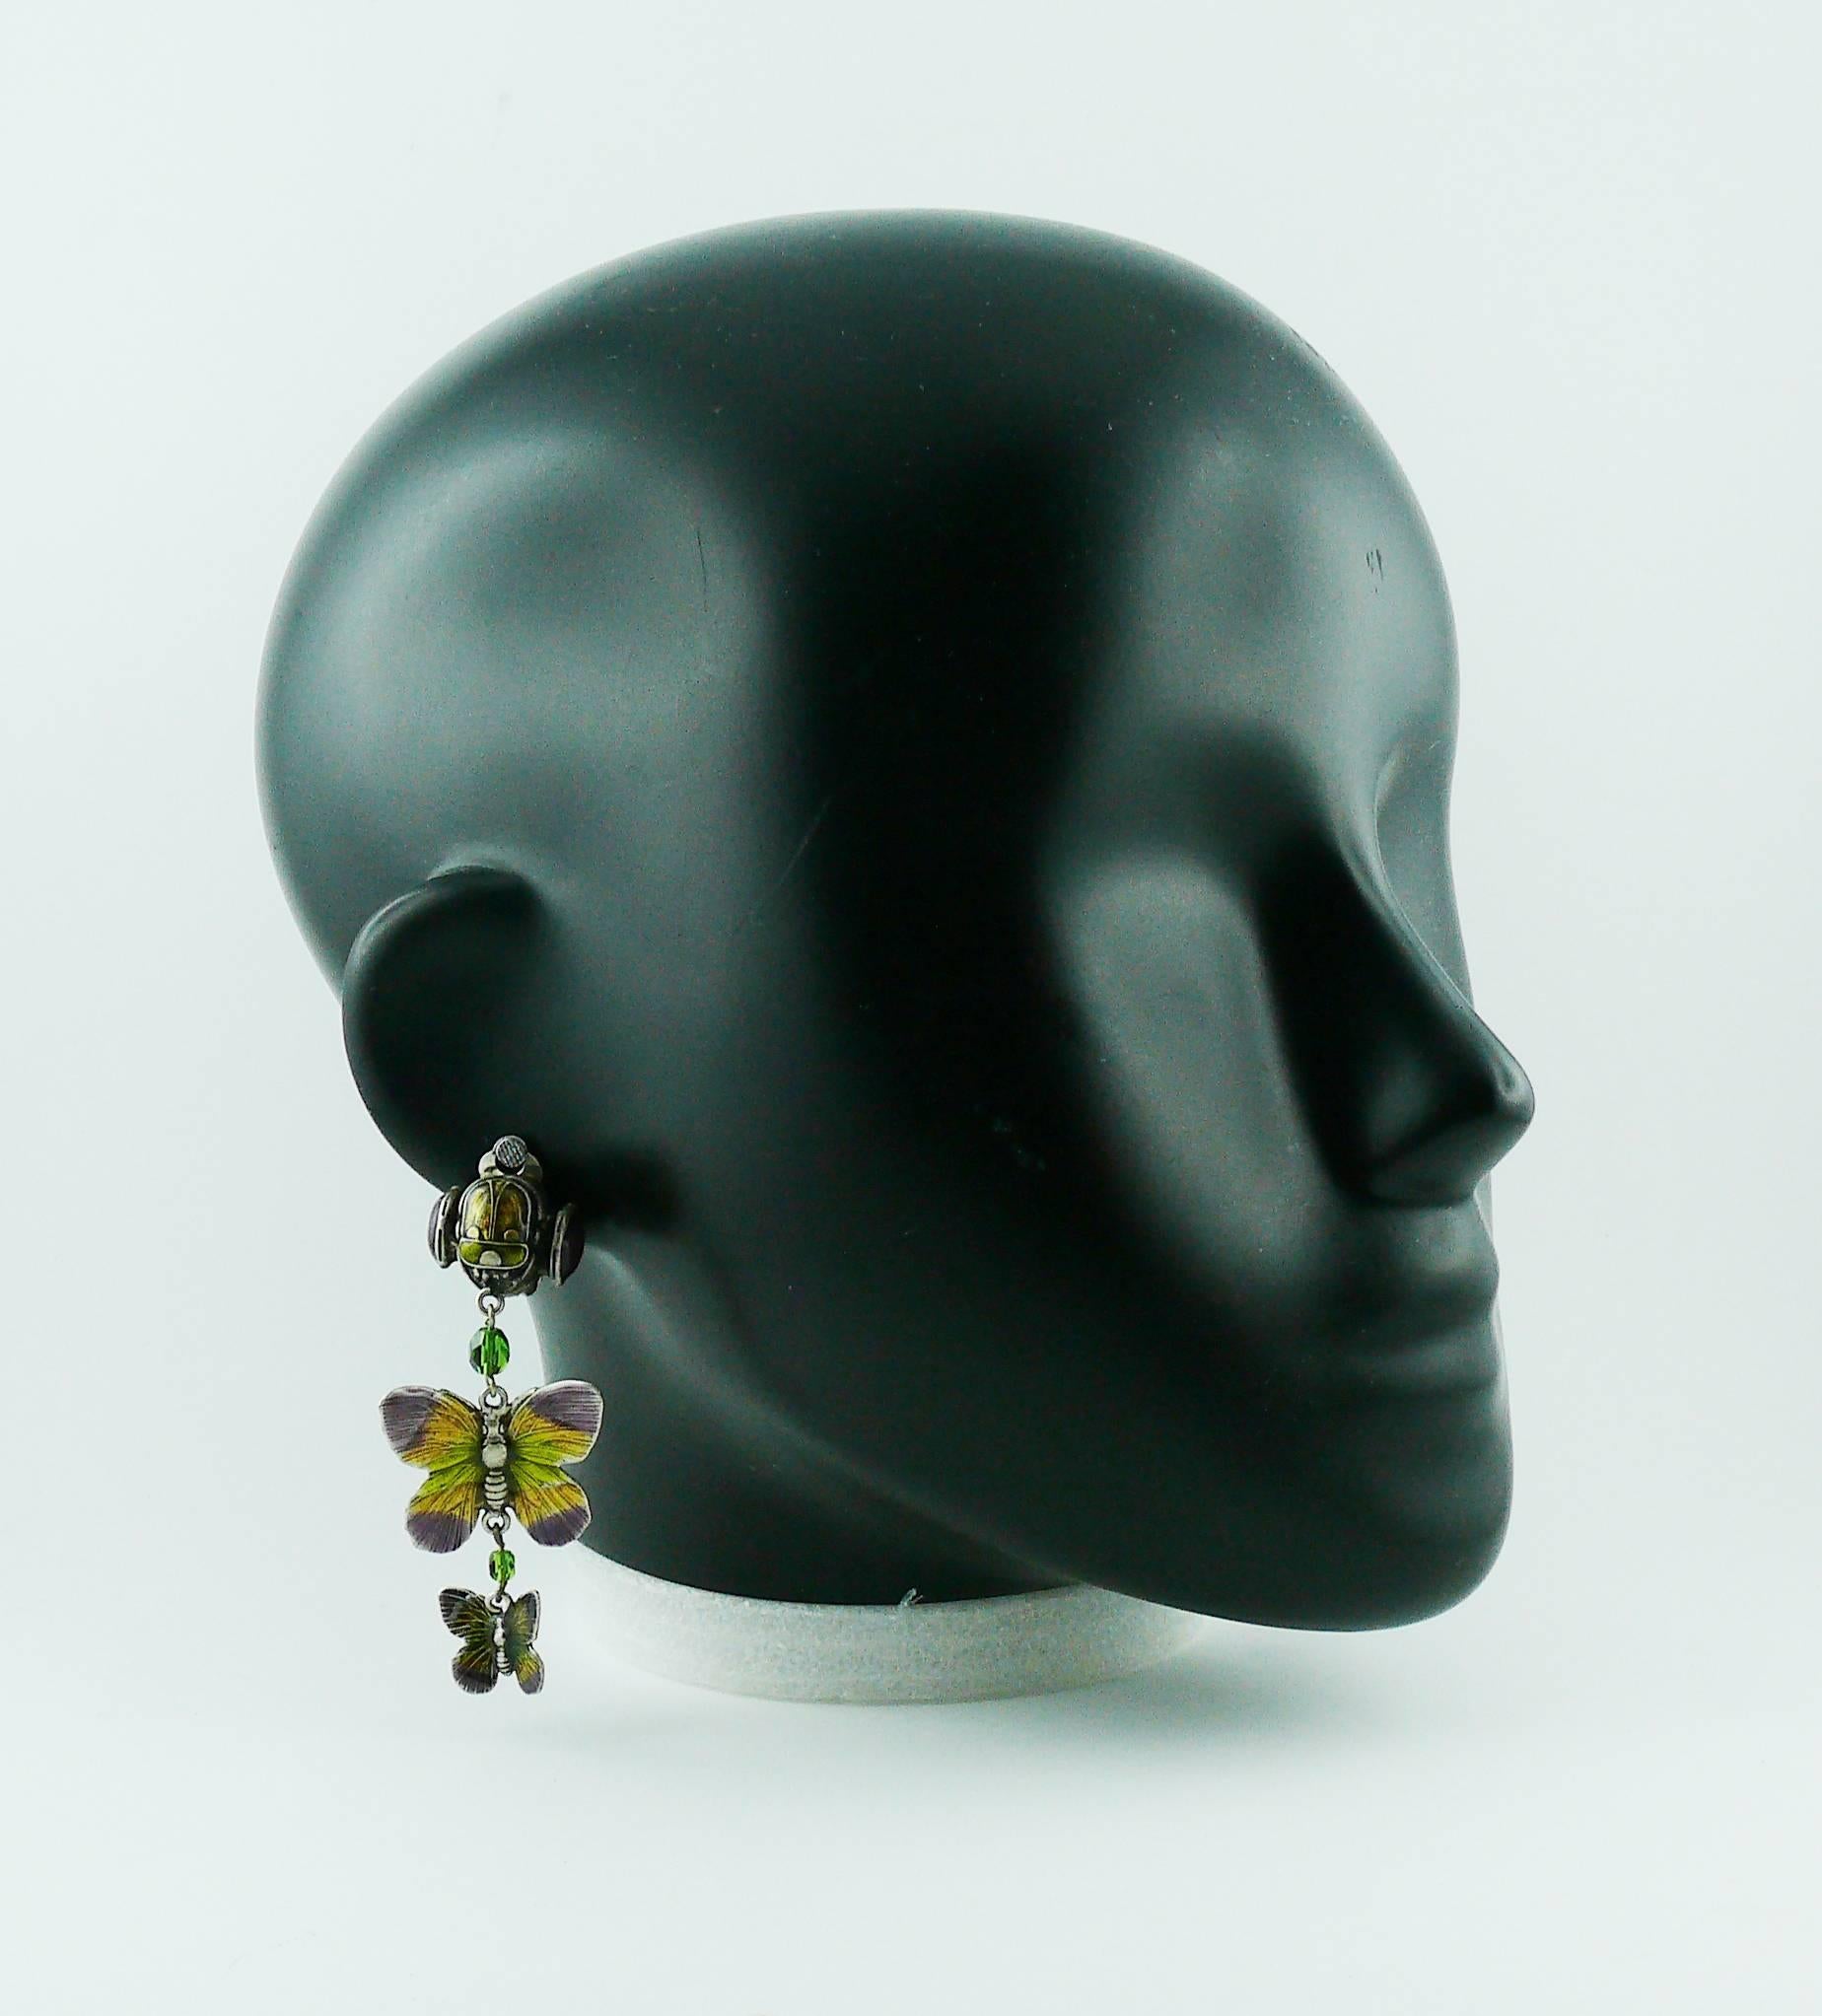 JEAN PAUL GAULTIER 1990s dangling earrings (clip-on) featuring multicolor enameled scarab and butterflies with green faceted glass beads in a antiqued silver tone setting.

Unmarked.

Indicative measurements : height approx. 6.9 cm (2.72 inches) /